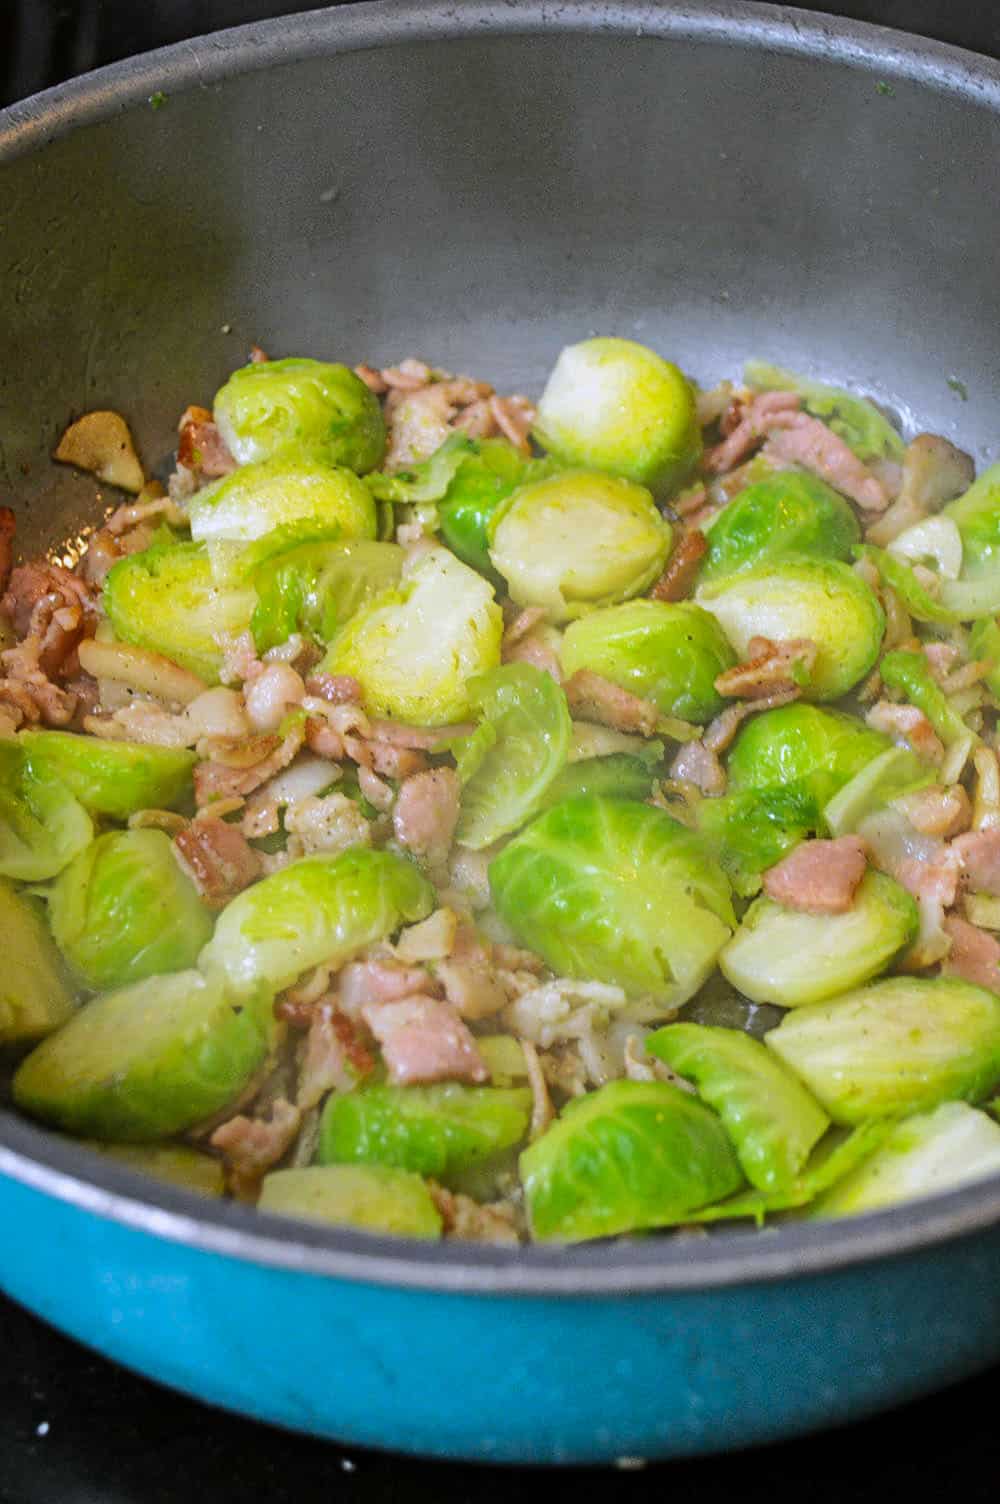 bacon and bussel sprouts in a frying pan